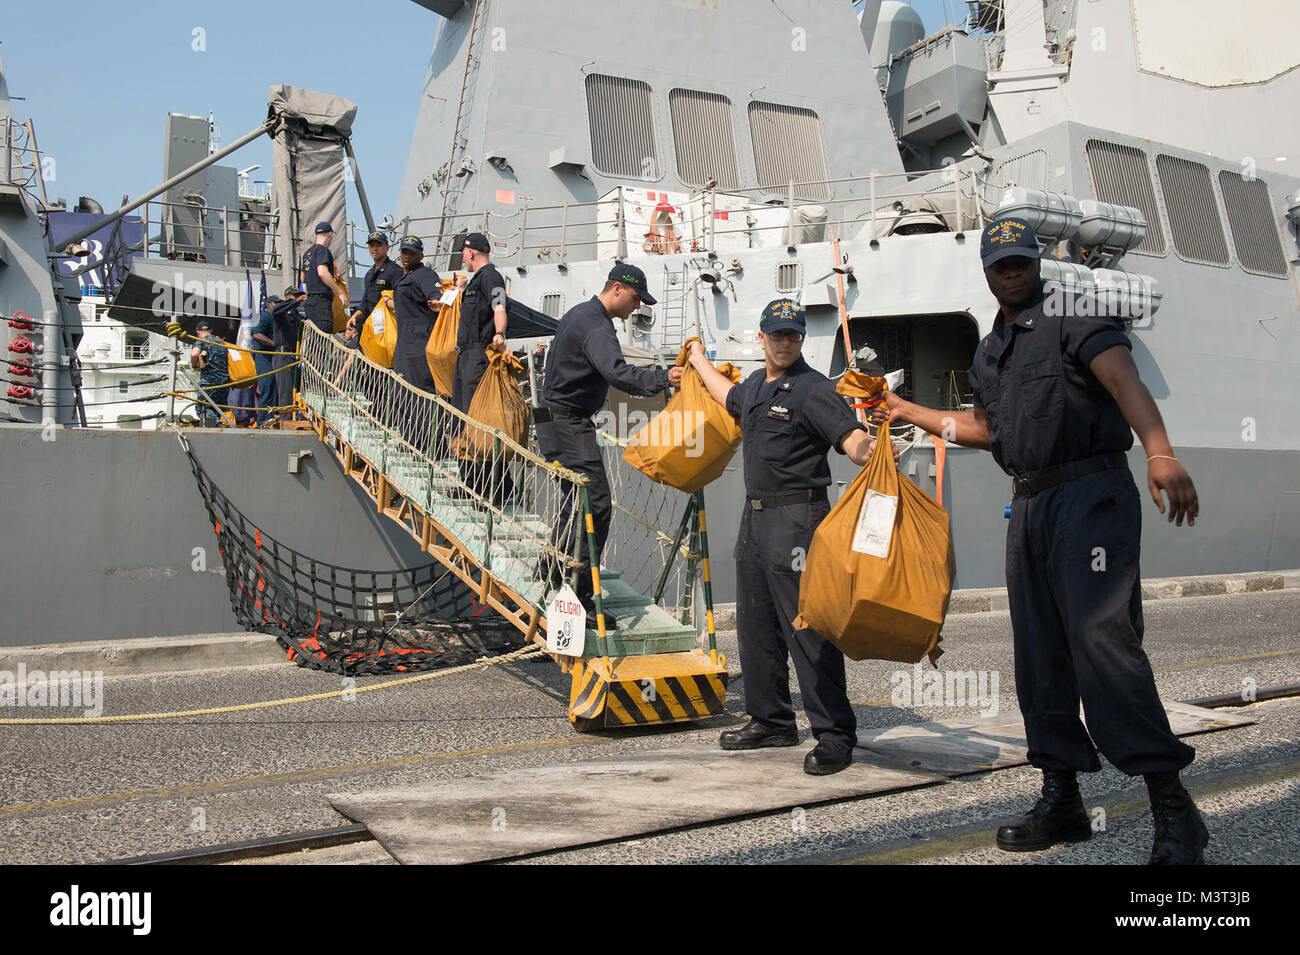 160413-N-MD297-040 ACAJUTLA, El Salvador (April 13, 2016) Sailors assigned to the Arleigh Burke-class guided-missile destroyer USS Lassen (DDG 82) form a line to bring more than 3,000 lbs. of mail onto the ship during a brief stop for fuel (BSF) in Acajutla, El Salvador. Lassen is currently underway in support of Operation Martillo, a joint operation with the U.S. Coast Guard and partner nations within the 4th Fleet area of responsibility. Operation Martillo is being led by Joint Interagency Task Force South, in support of U.S. Southern Command. (U.S. Navy photo by Mass Communication Specialis Stock Photo